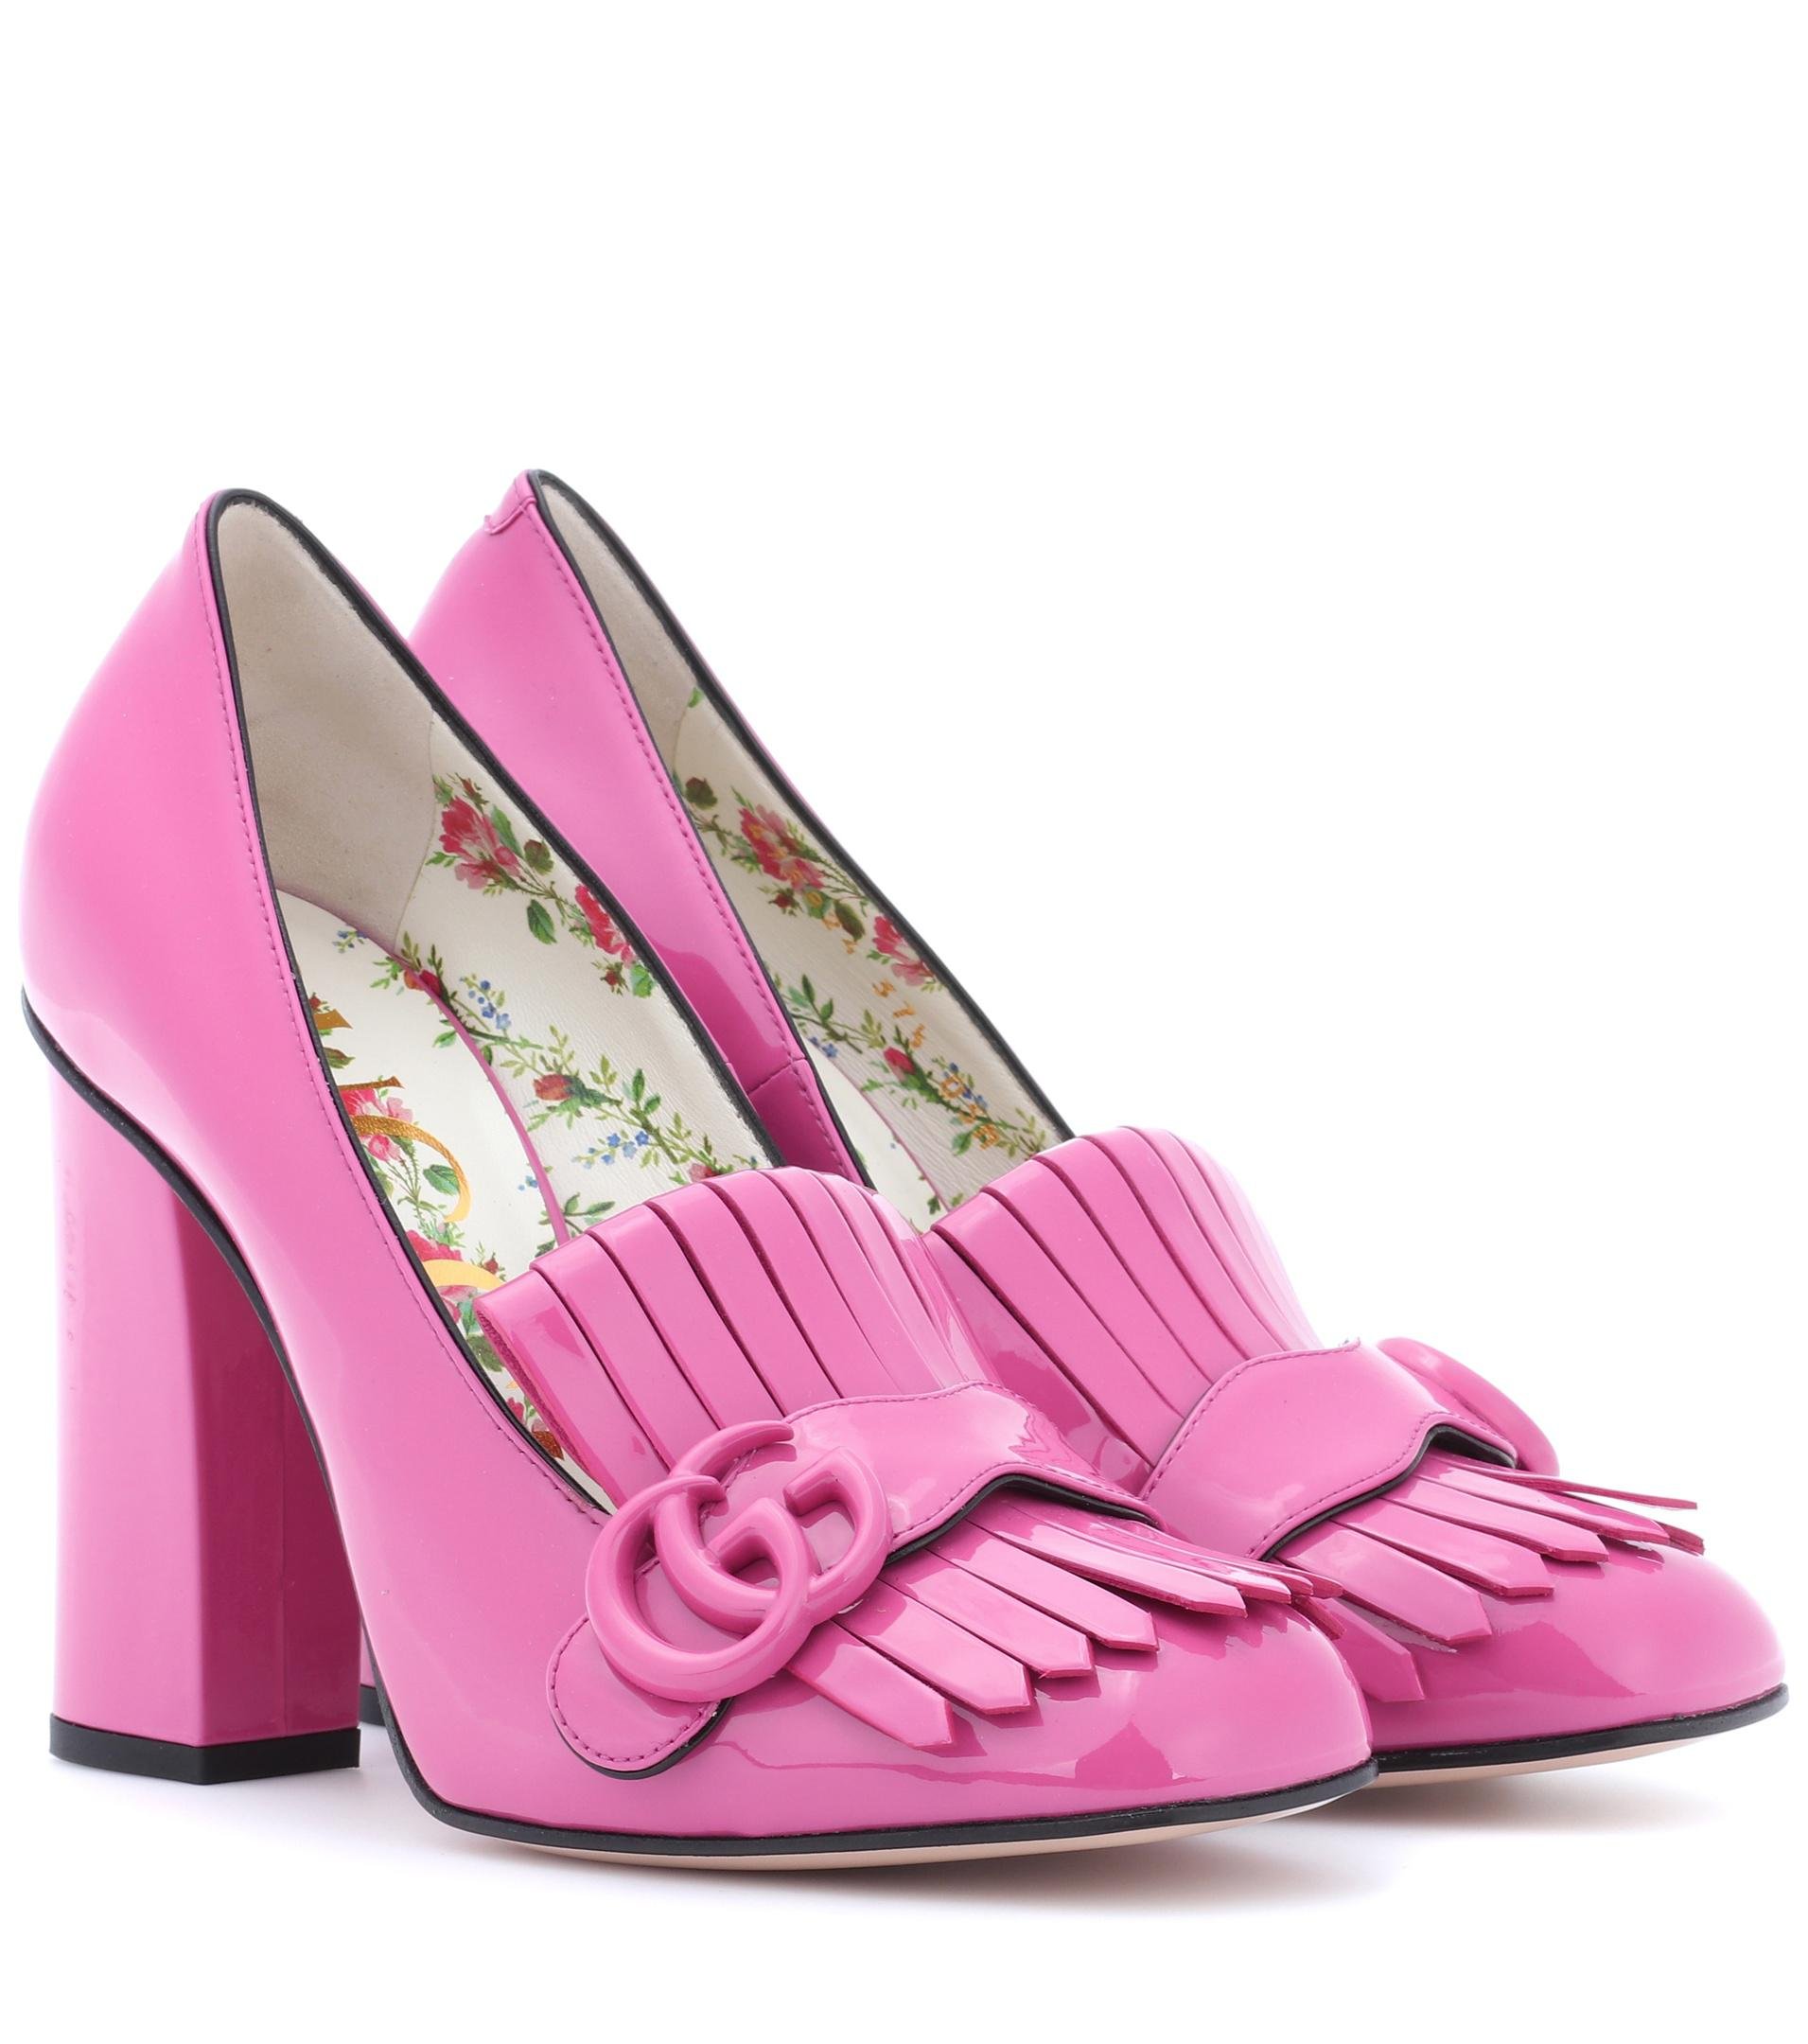 Lyst - Gucci Marmont Patent Leather Pumps in Pink